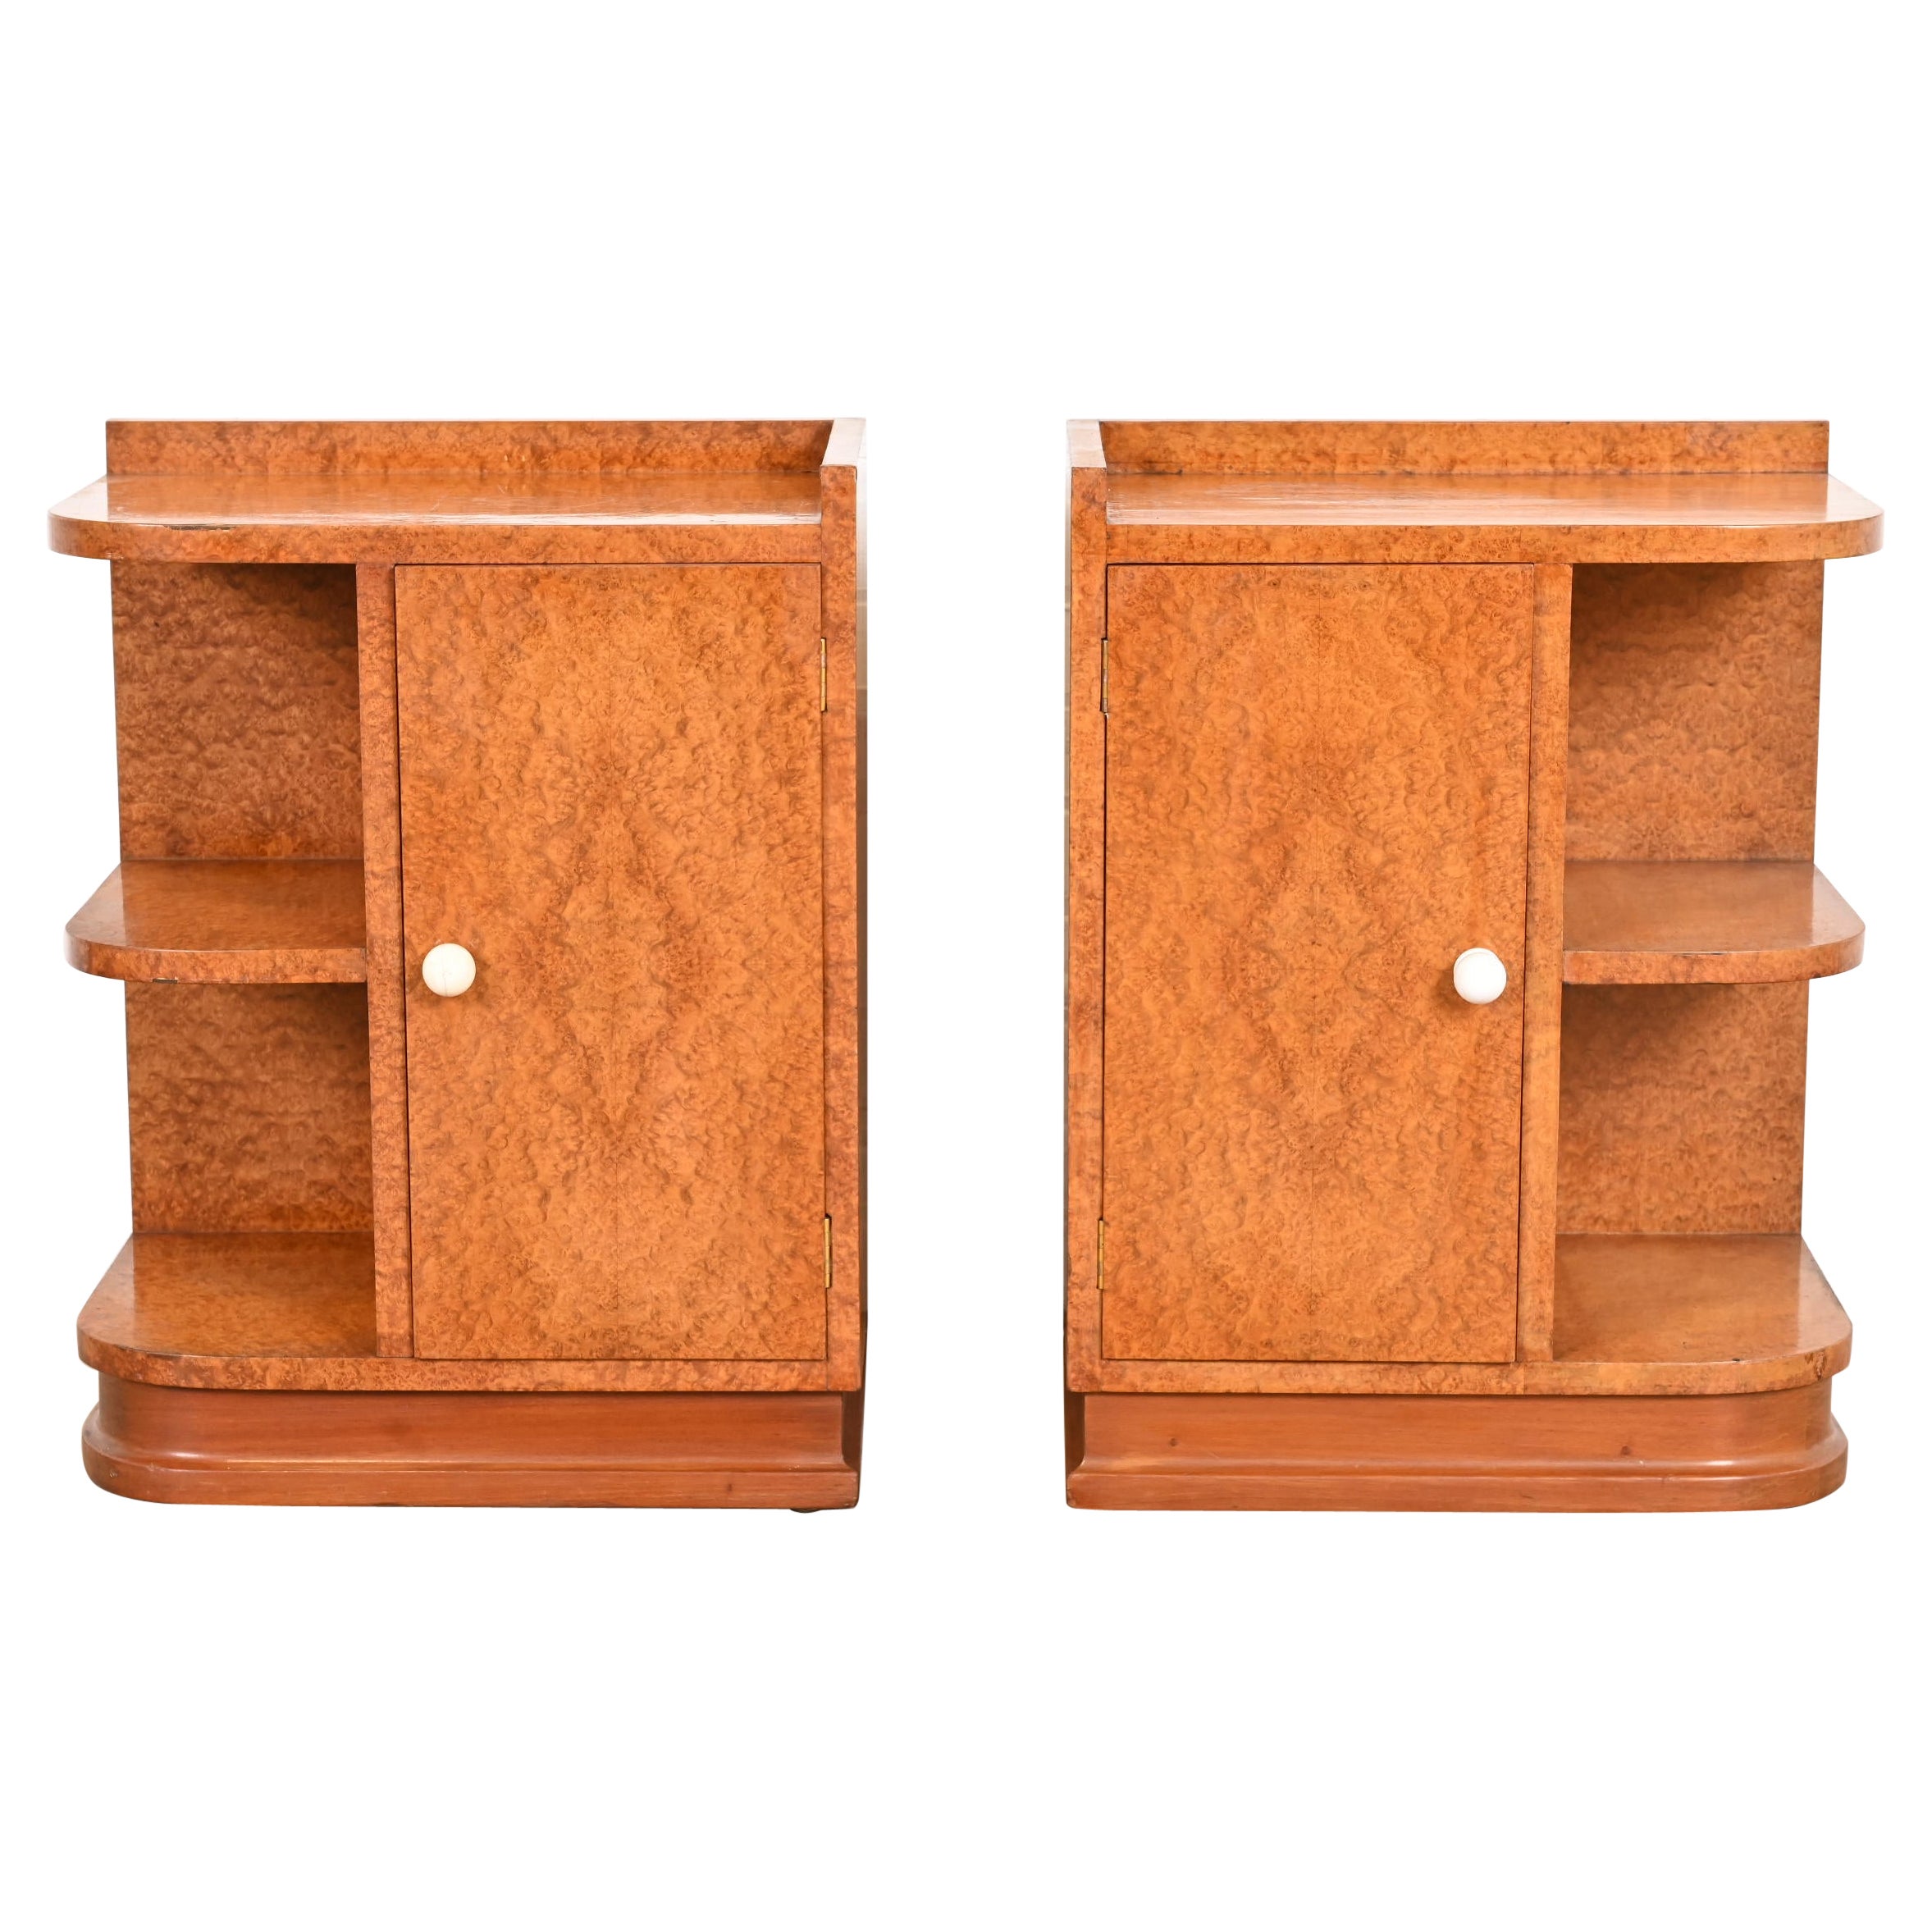 French Art Deco Burl Wood Nightstands in the Manner of Maison Dominique, 1930s For Sale